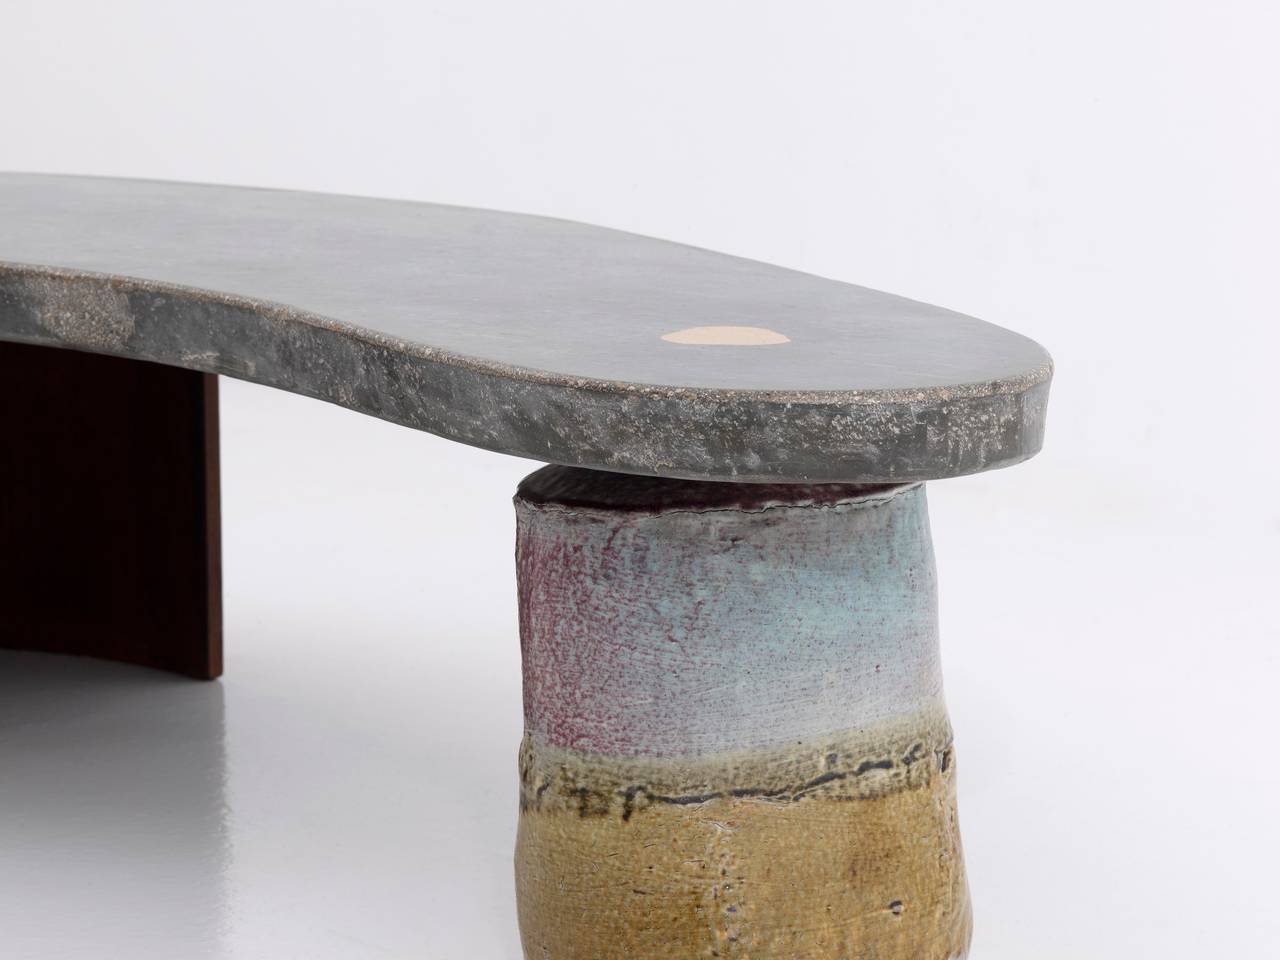 Organic Lined Concrete Bench by Lee Hun Chung, 2012 For Sale 2